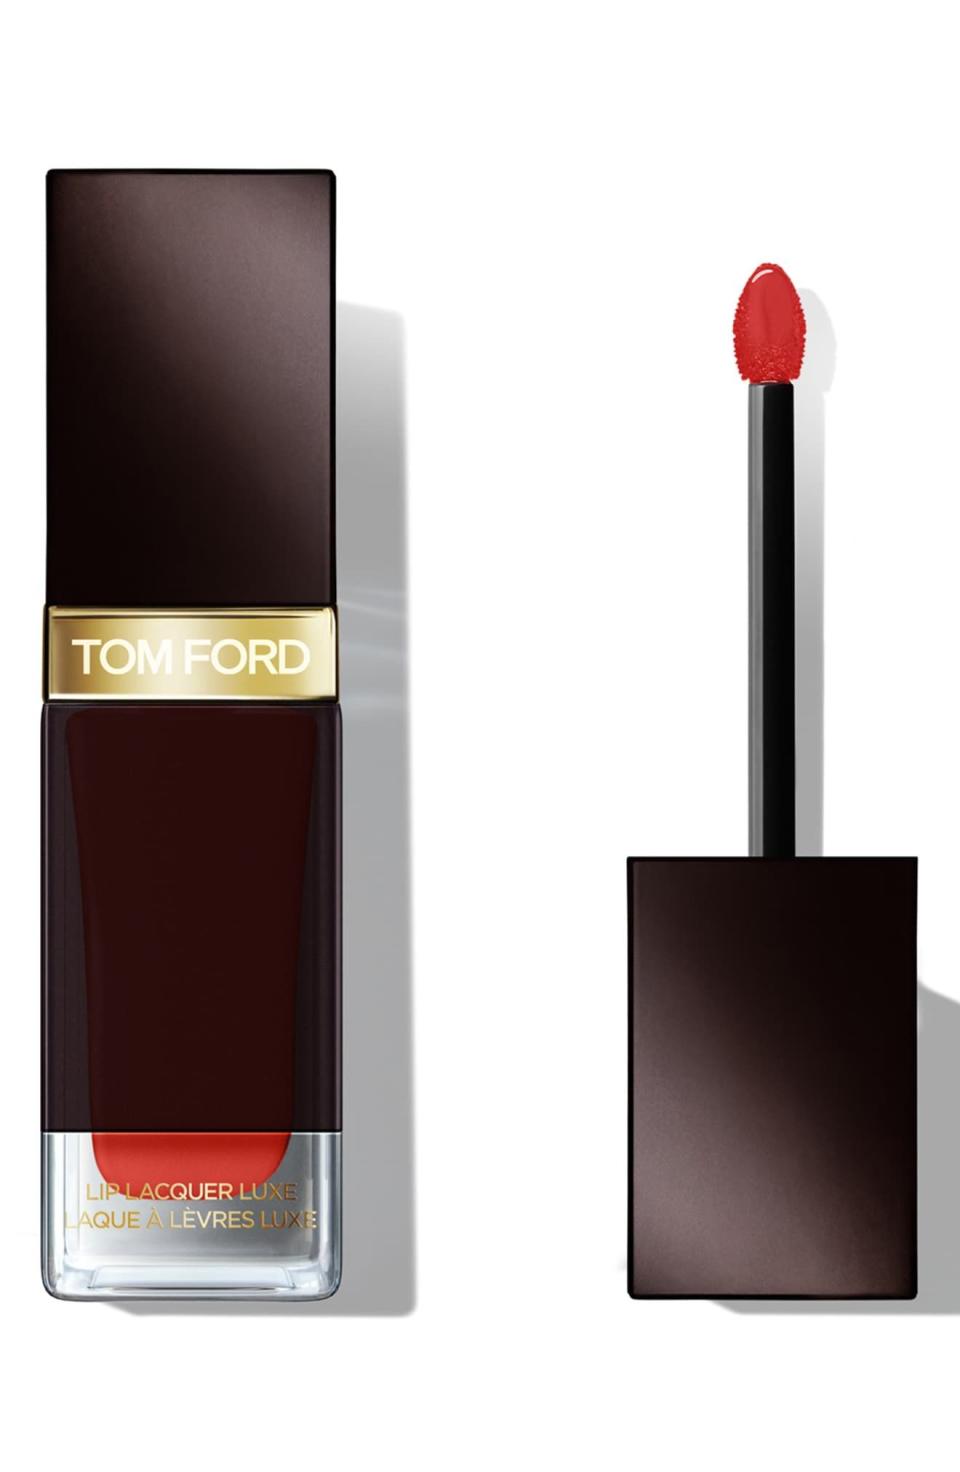 2) Tom Ford Lip Lacquer Luxe